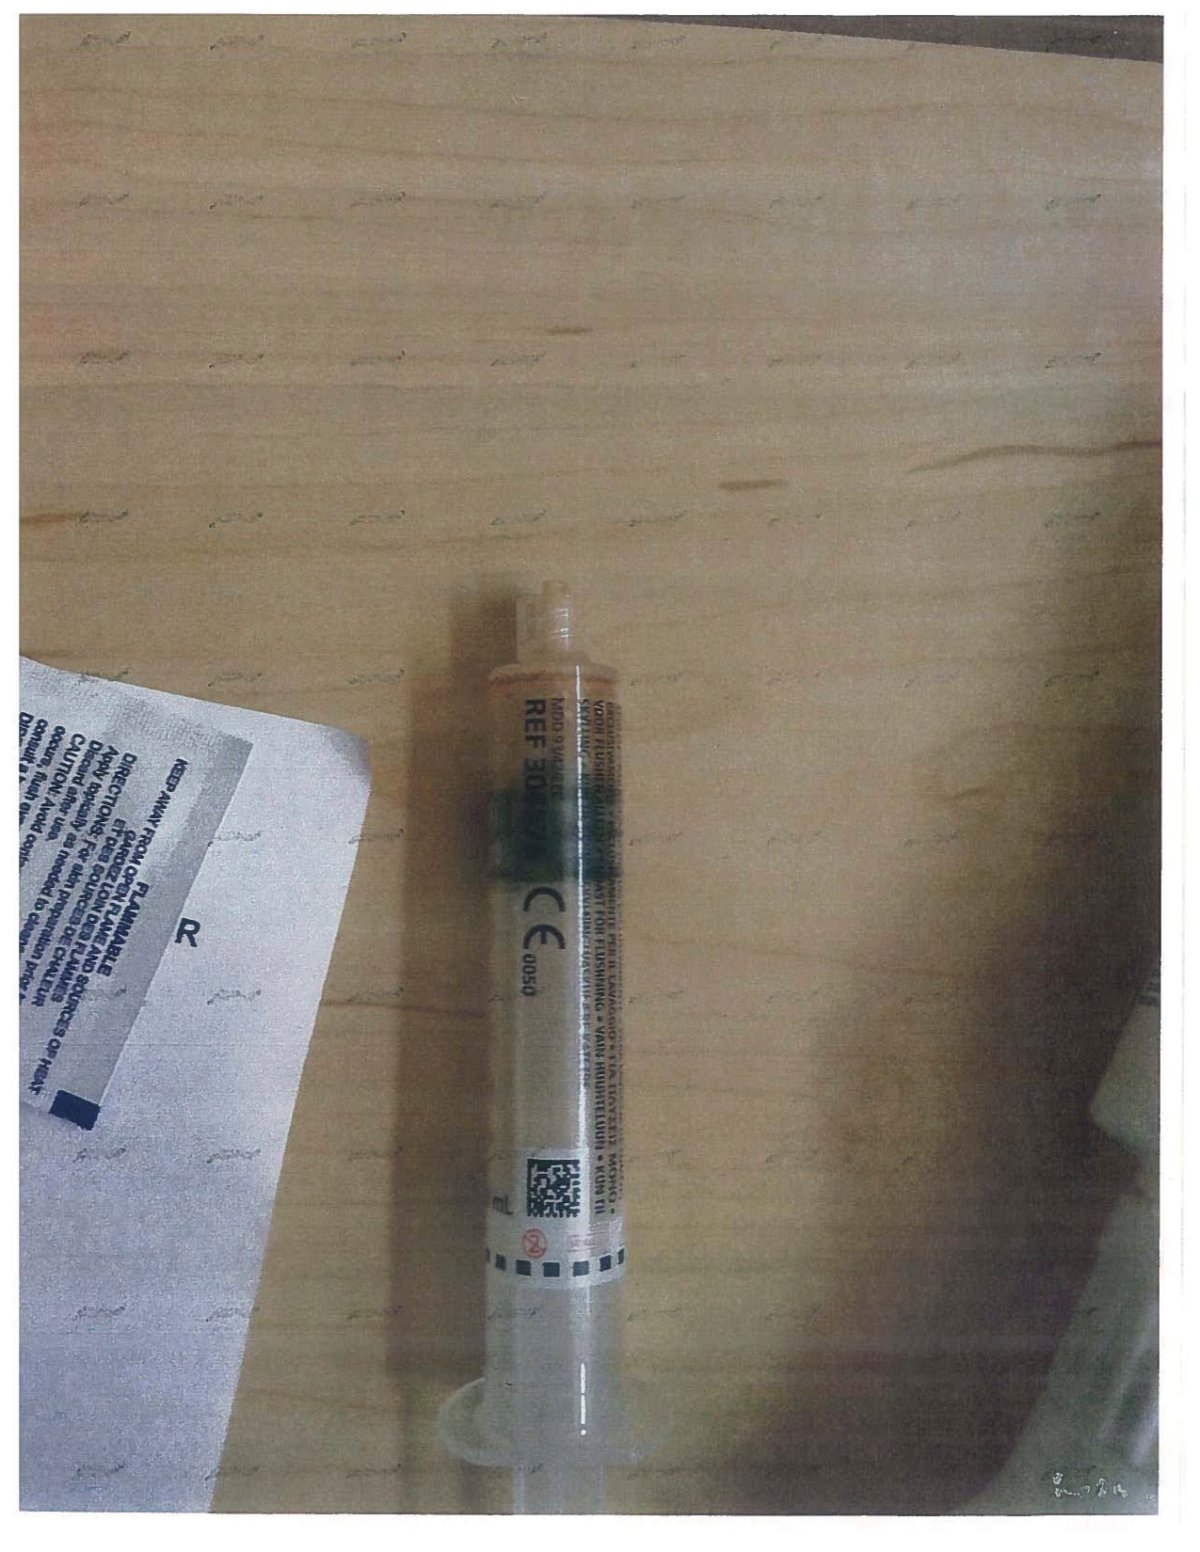 A syringe was located in Trevor Burke's hospital room.